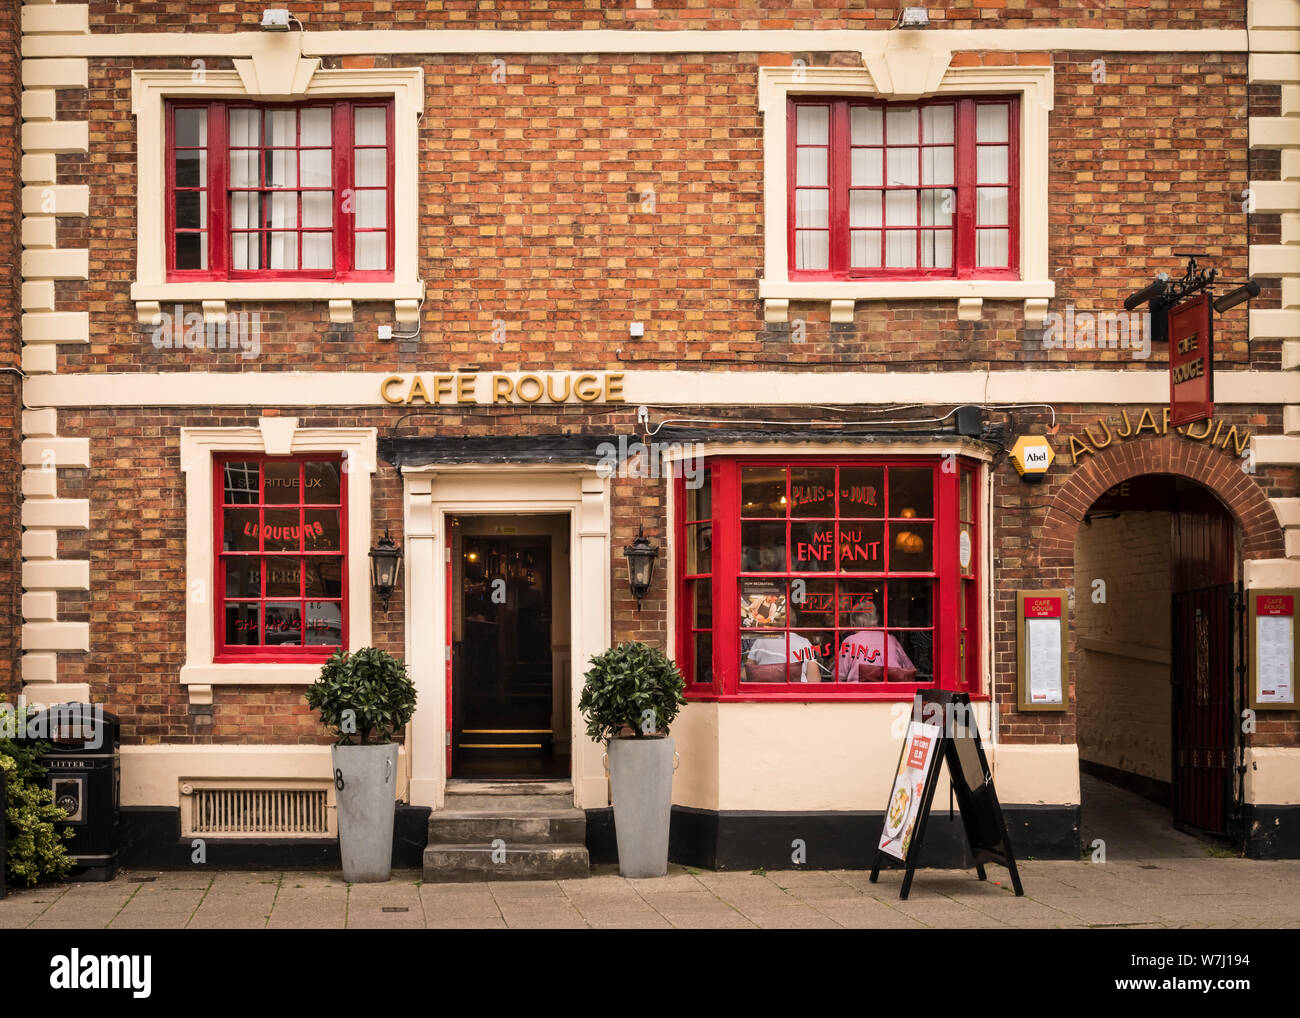 Cafes and restaurants: outside of the Cafe Rouge with an entrance, steps and bay window. Stock Photo